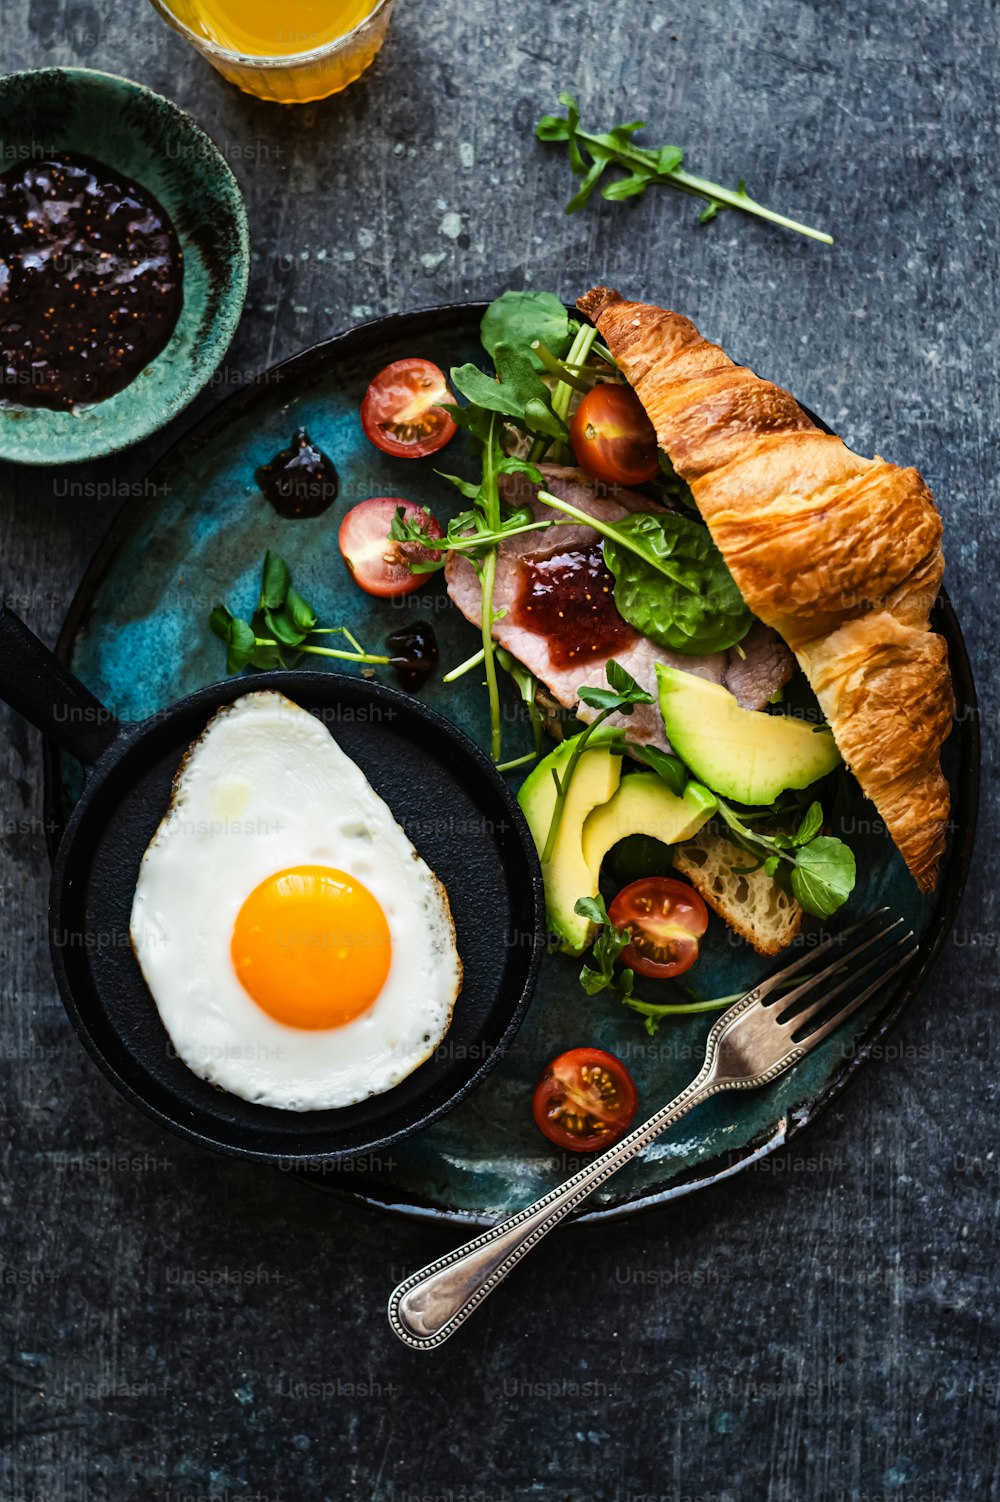 a plate of food with an egg and a croissant